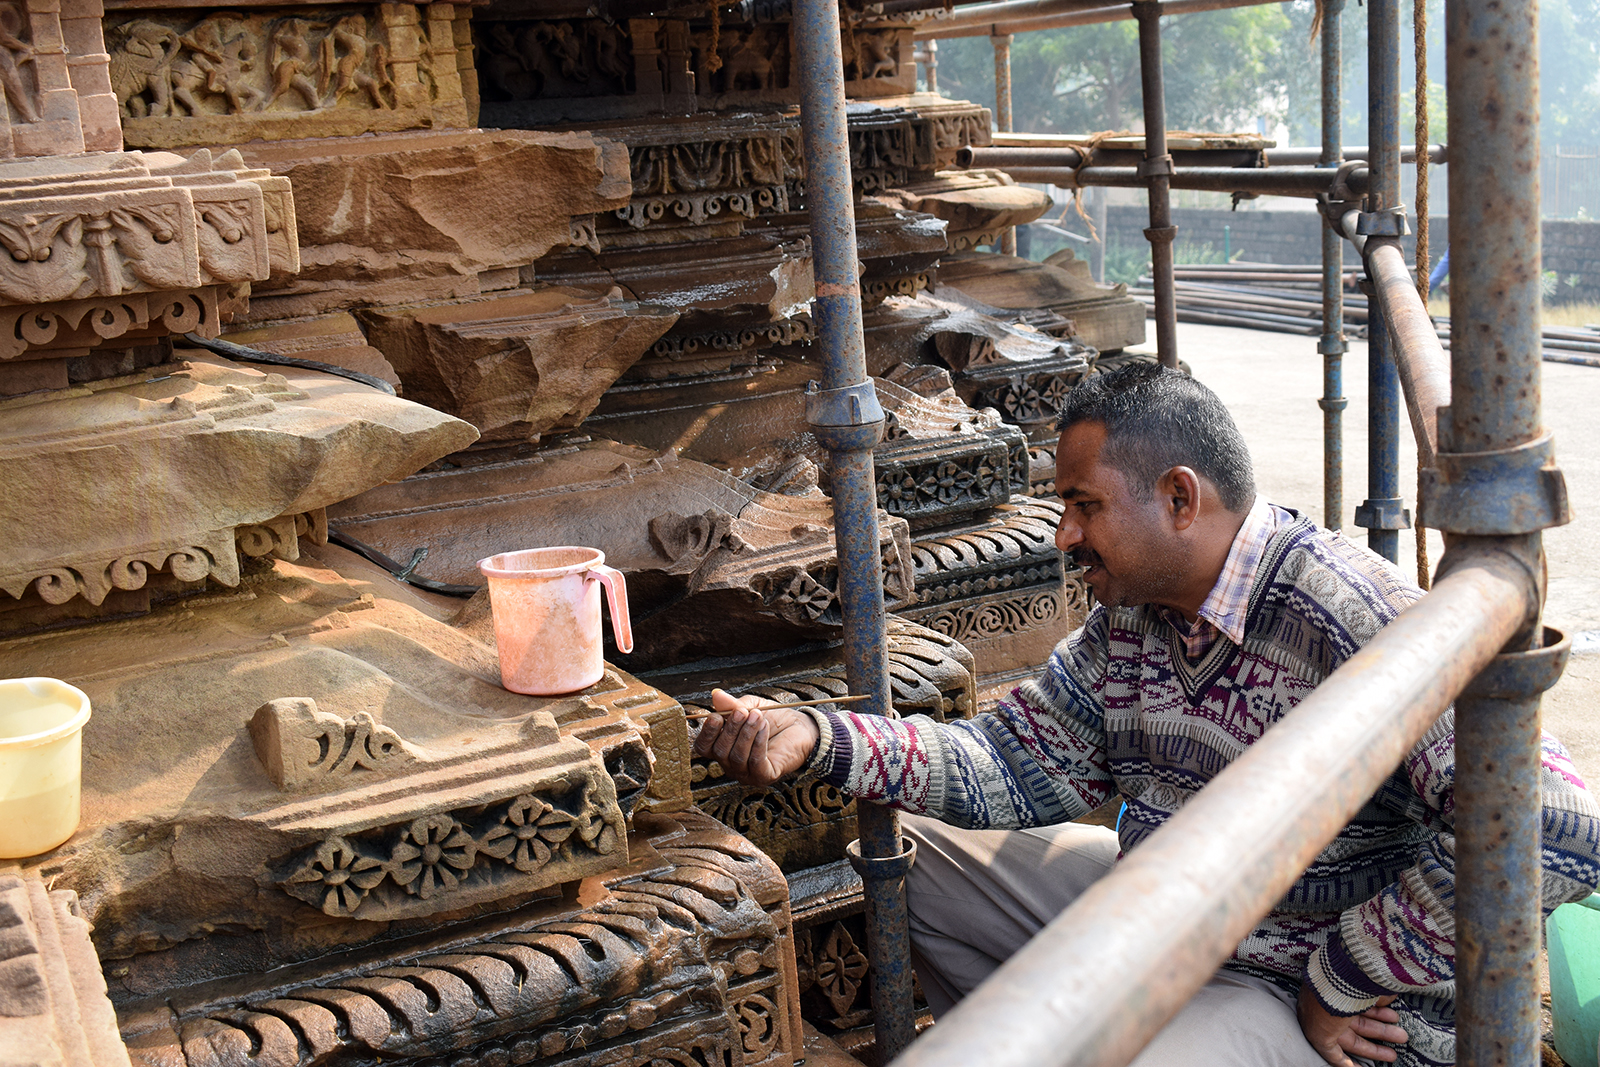 A worker cleans the intricately carved surfaces of a temple in Khajuraho, India, in Dec. 2021. RNS photo by Priyadarshini Sen